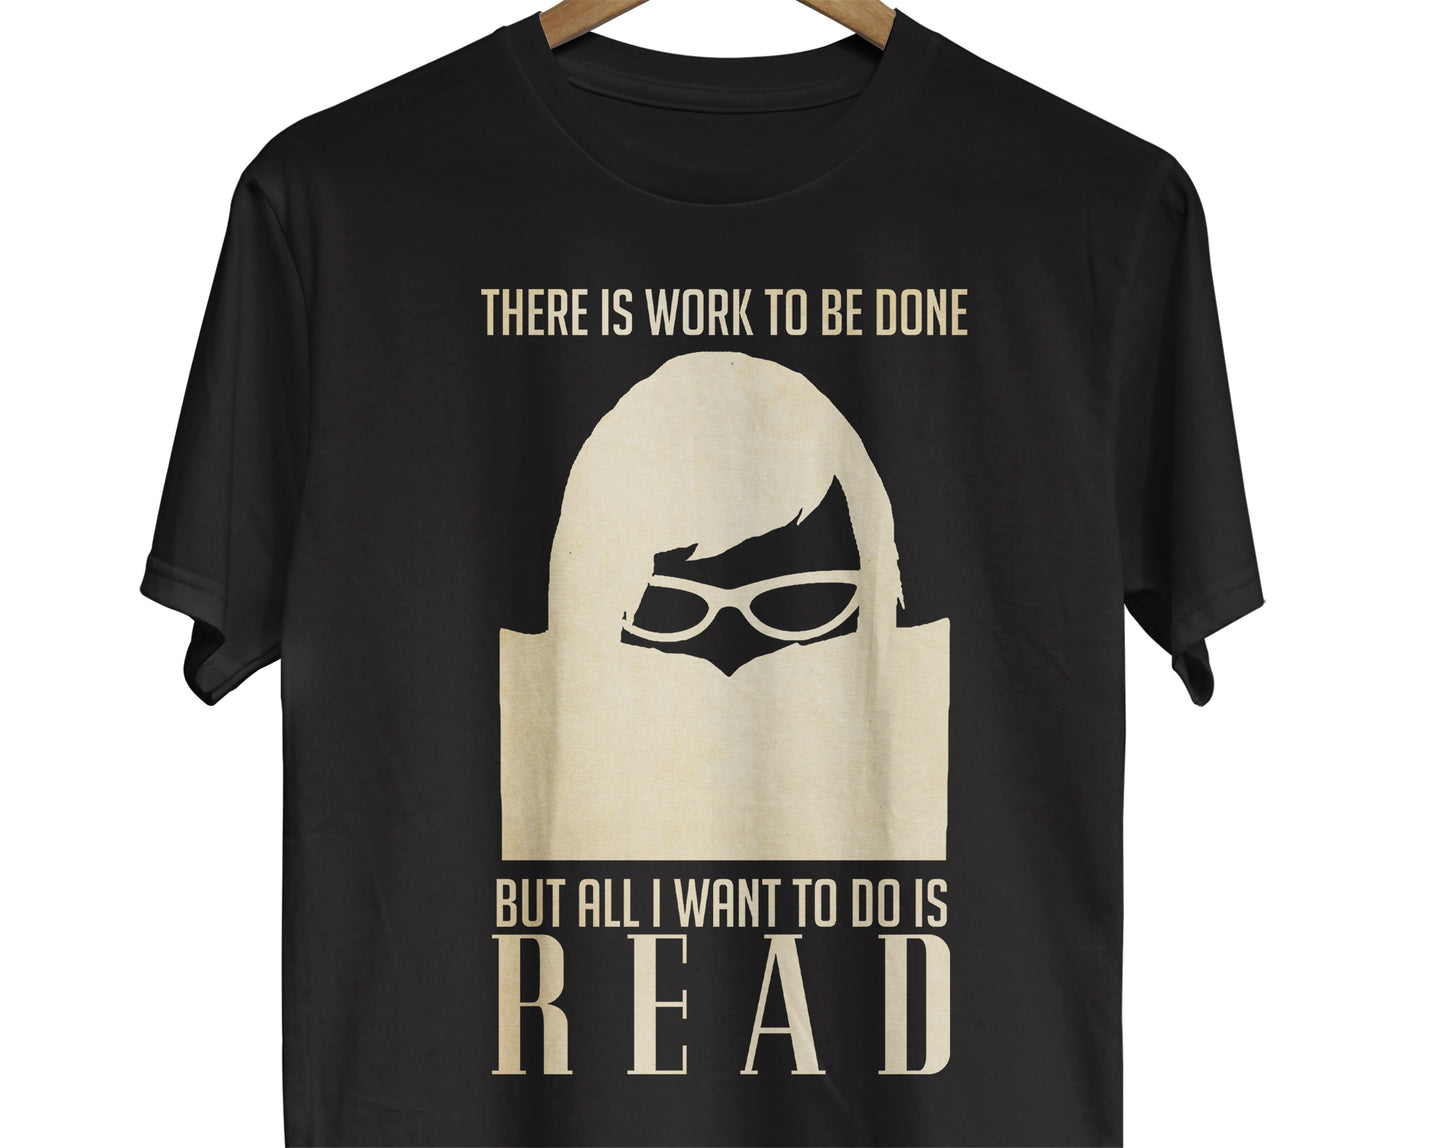 A Bookworm t-shirt featuring a silhouette of a reader immersed in a book, accompanied by the text "There Is Work To Be Done But All I Want to Do Is Read". 